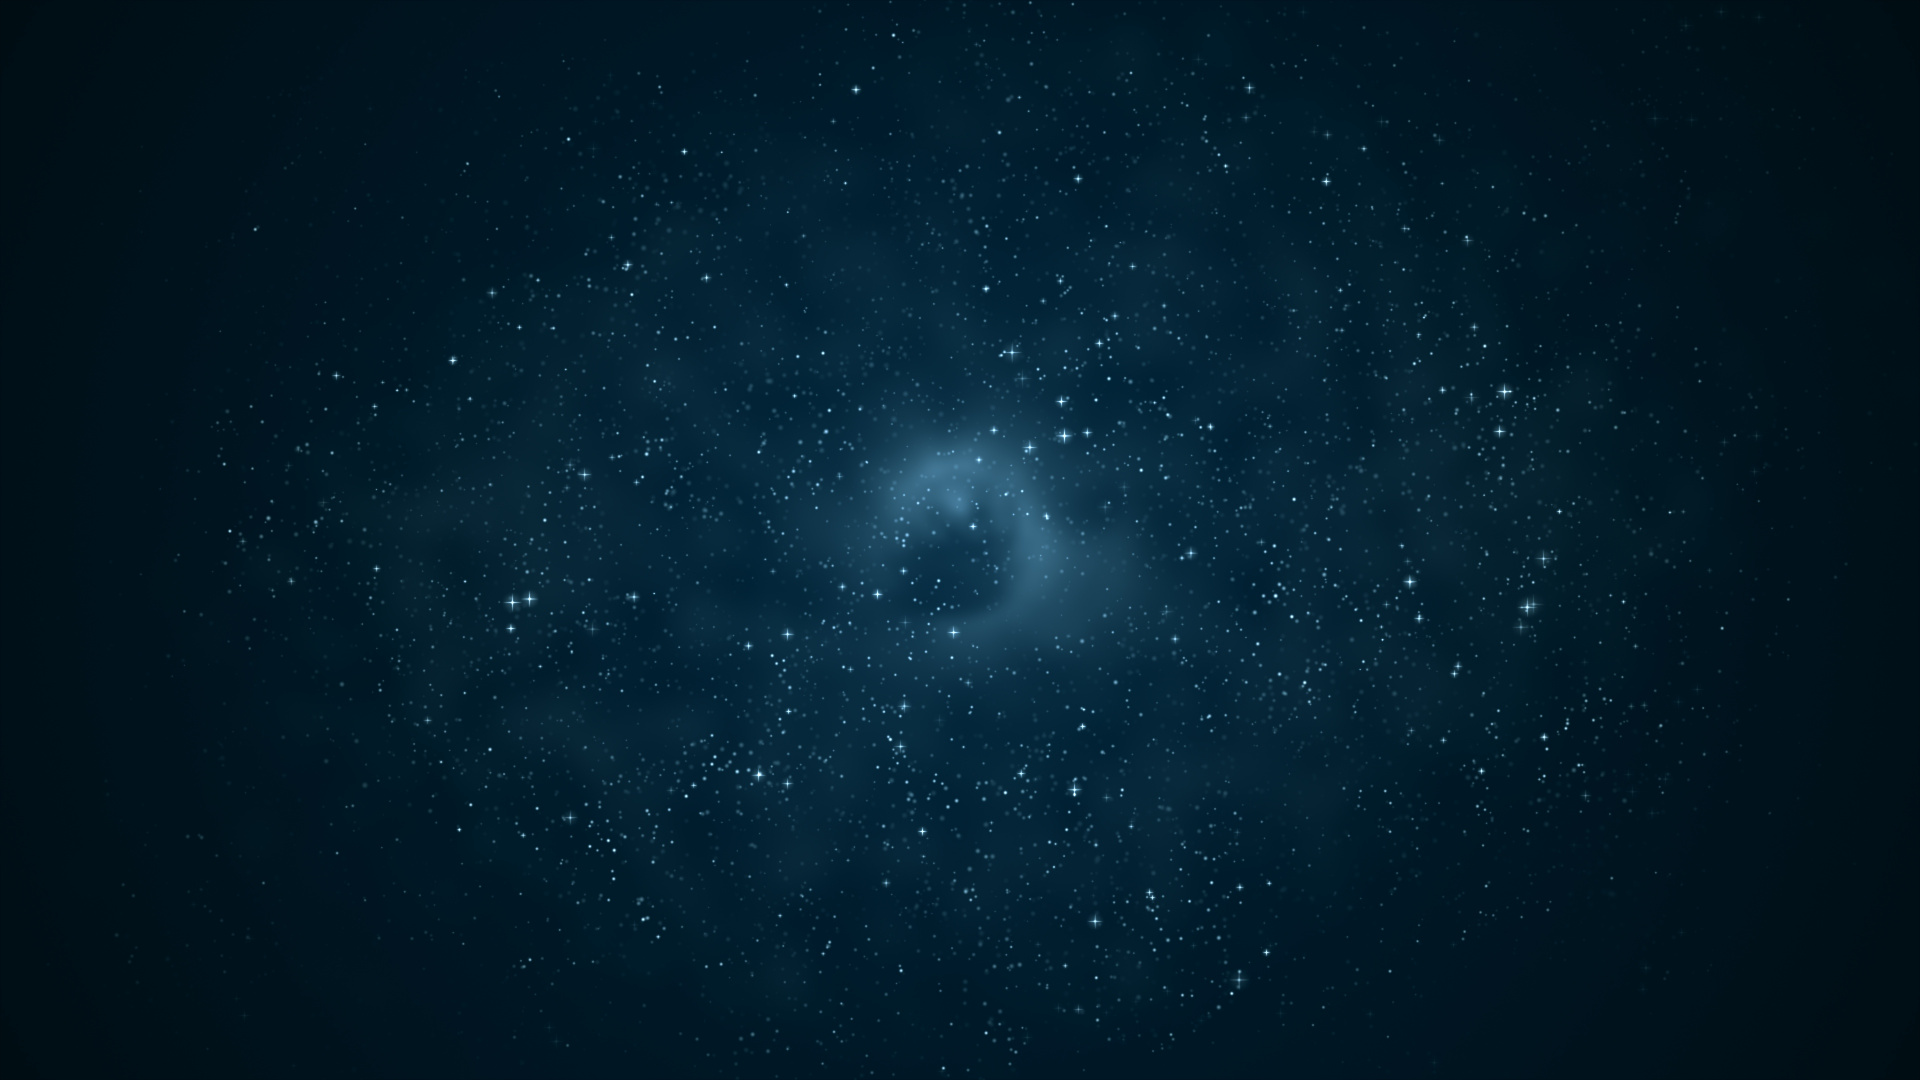 Starry Night Sky Over The Starry Night. Wallpaper in 1920x1080 Resolution